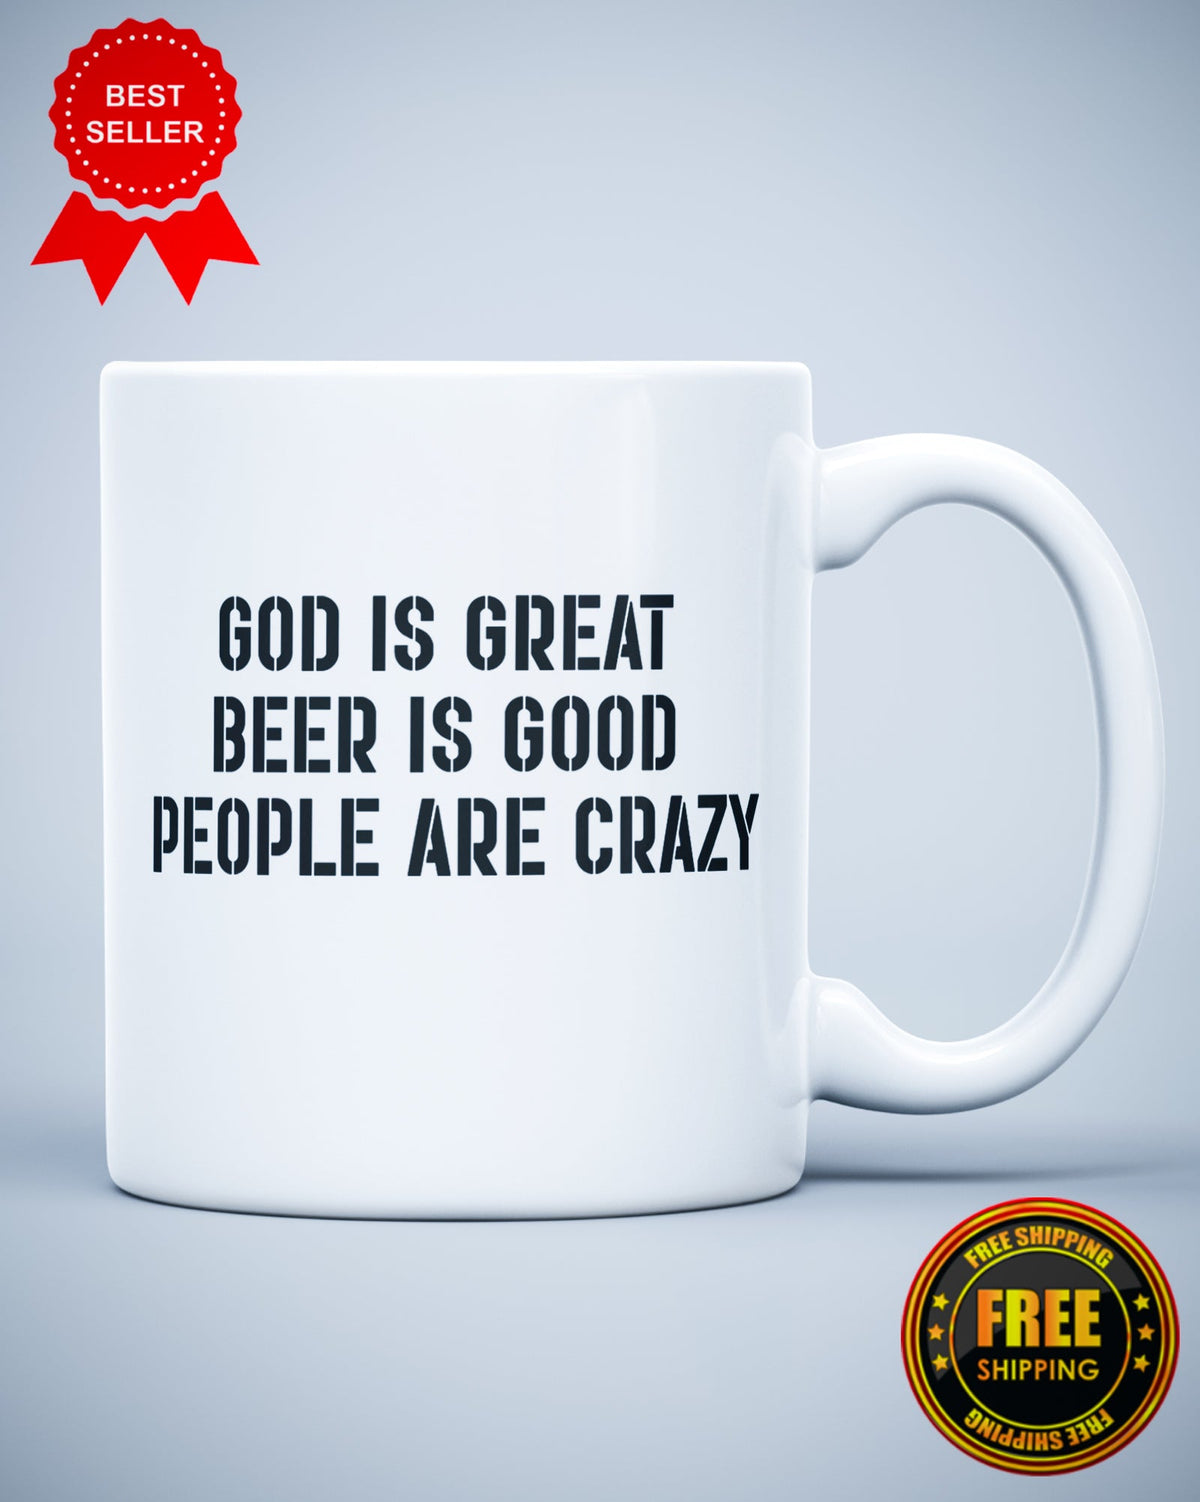 God is Great Beer is Good People Are Crazy Funny Ceramic Mug